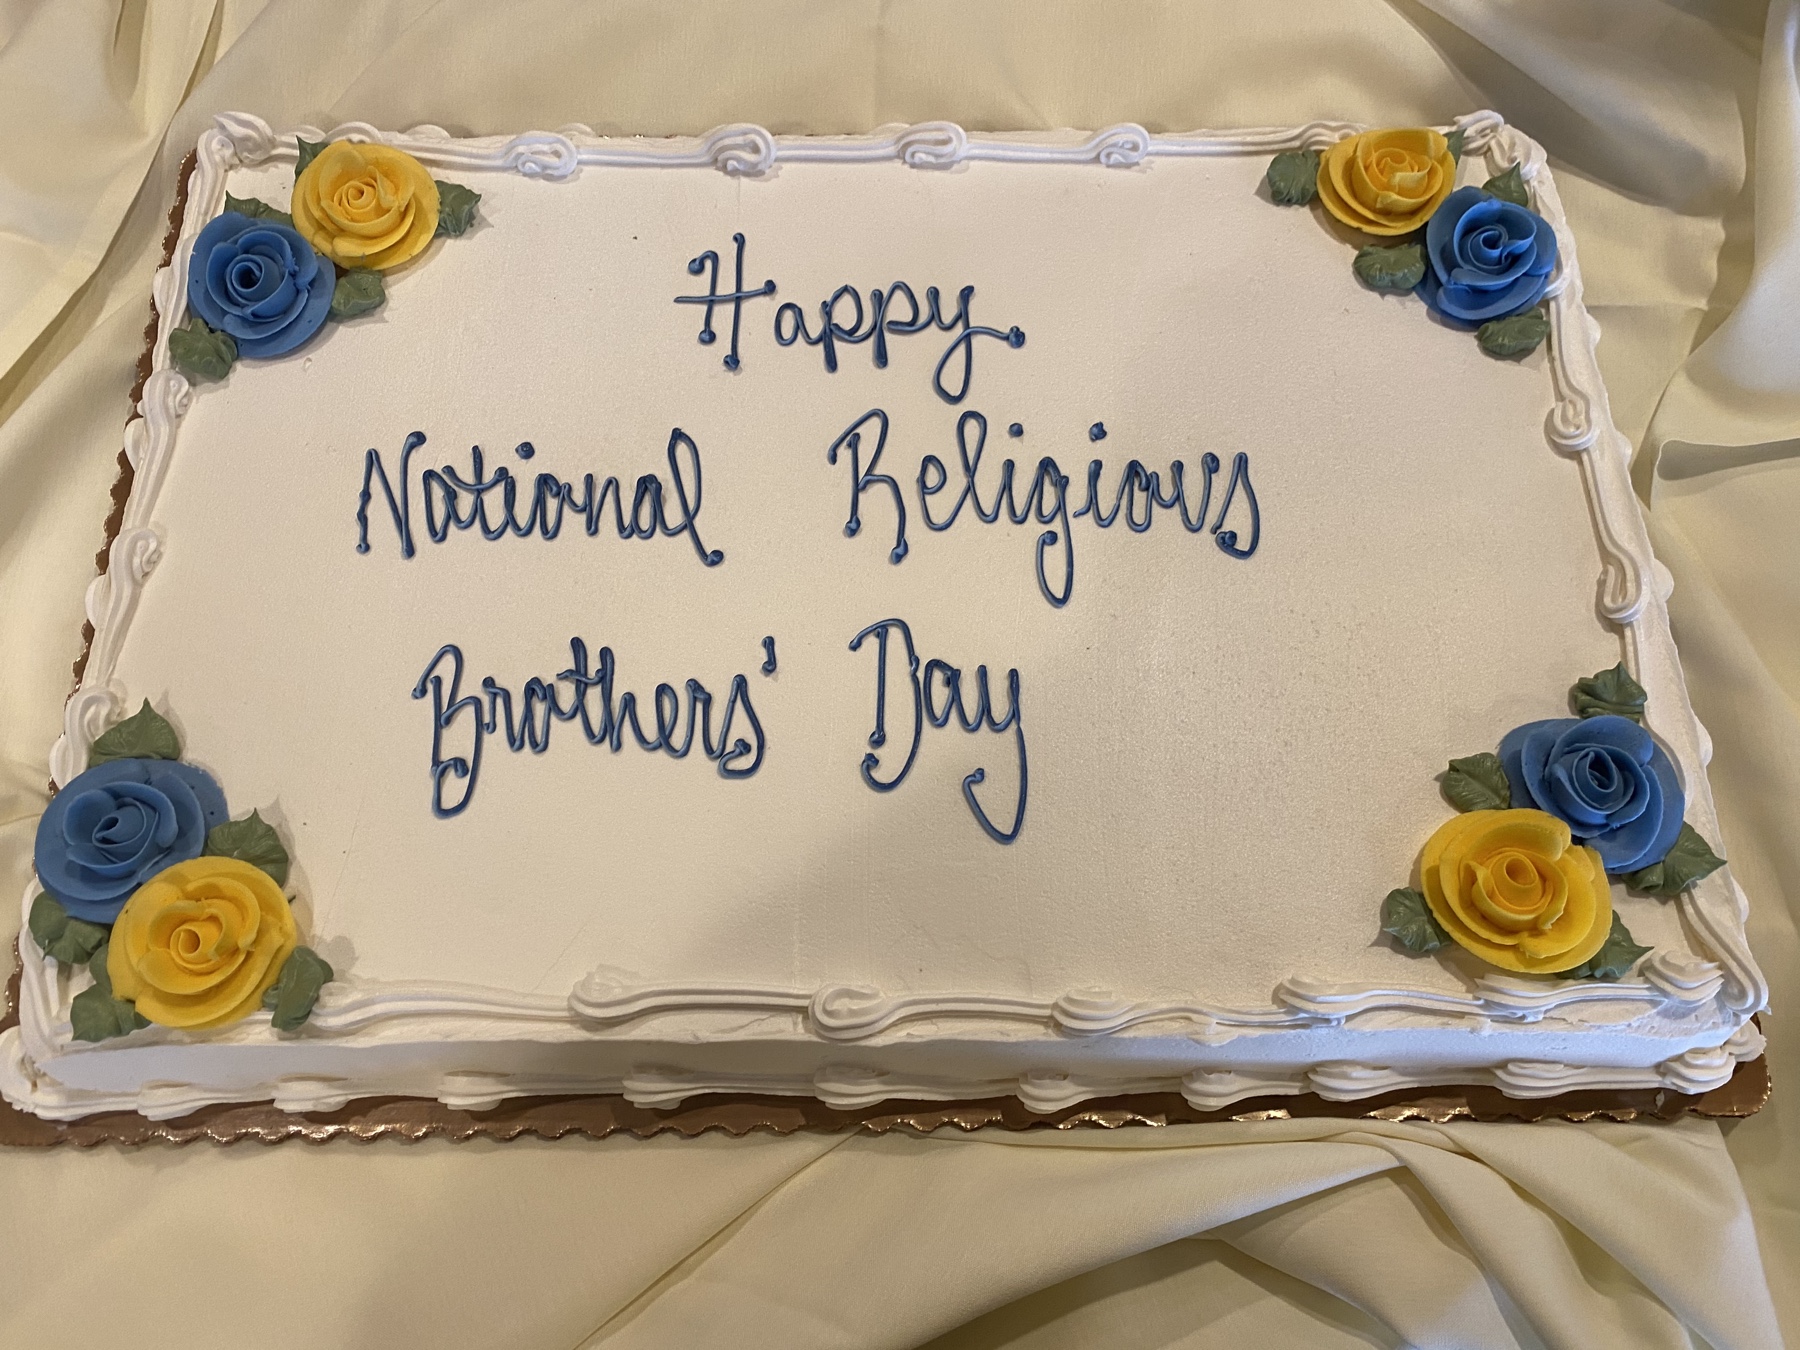 National Religious Brothers Day 2021